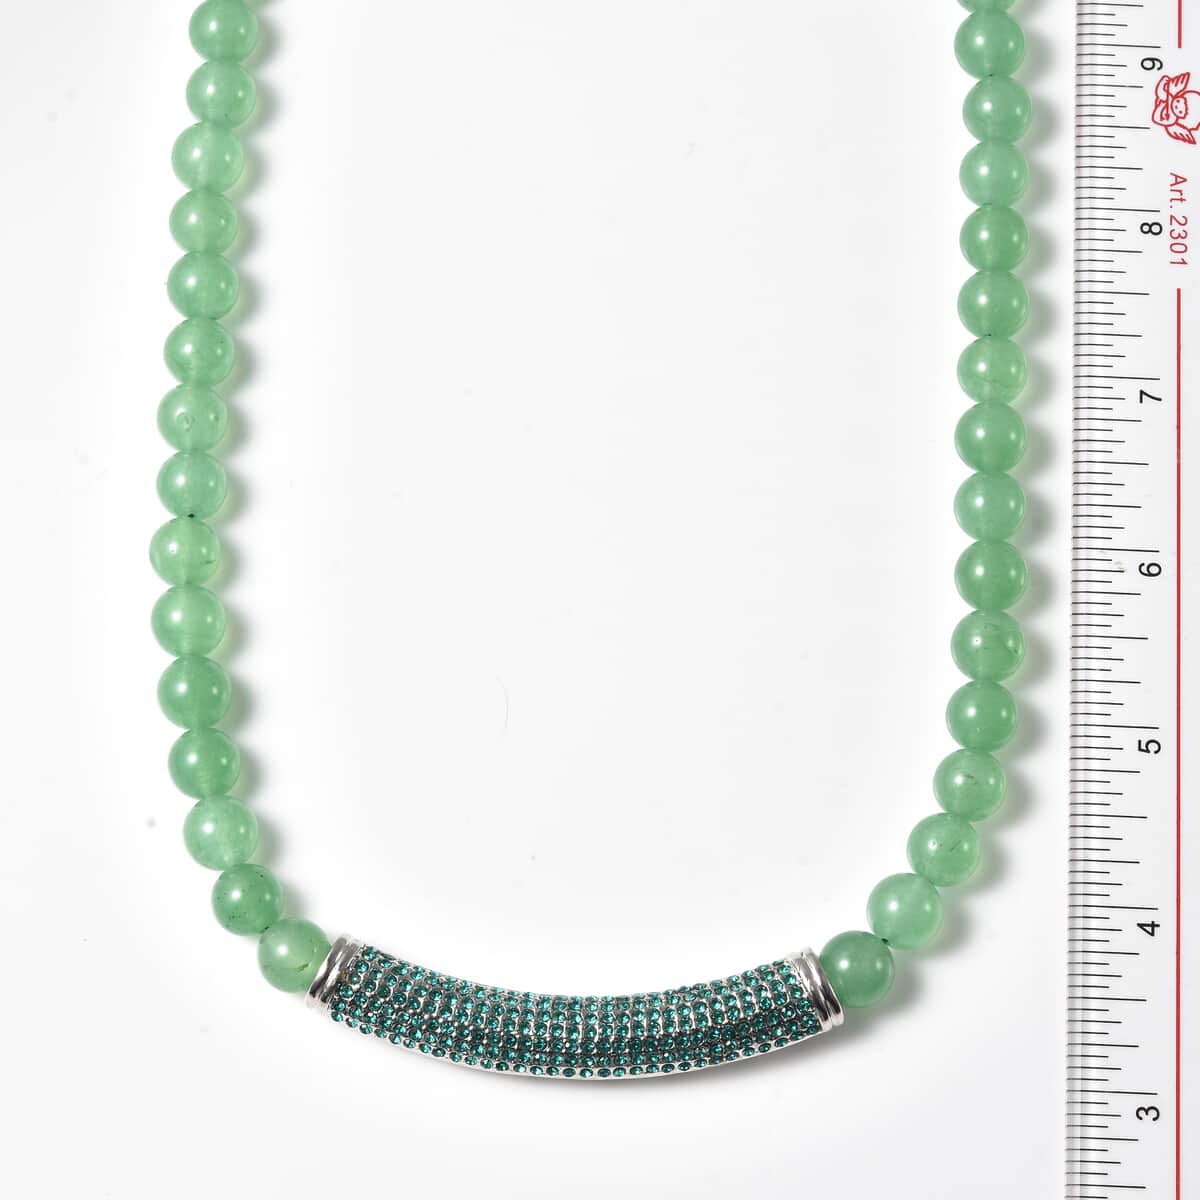 Green Aventurine, Neon Green Austrian Crystal Beaded Necklace with Charm (20 Inches) in Silvertone image number 5